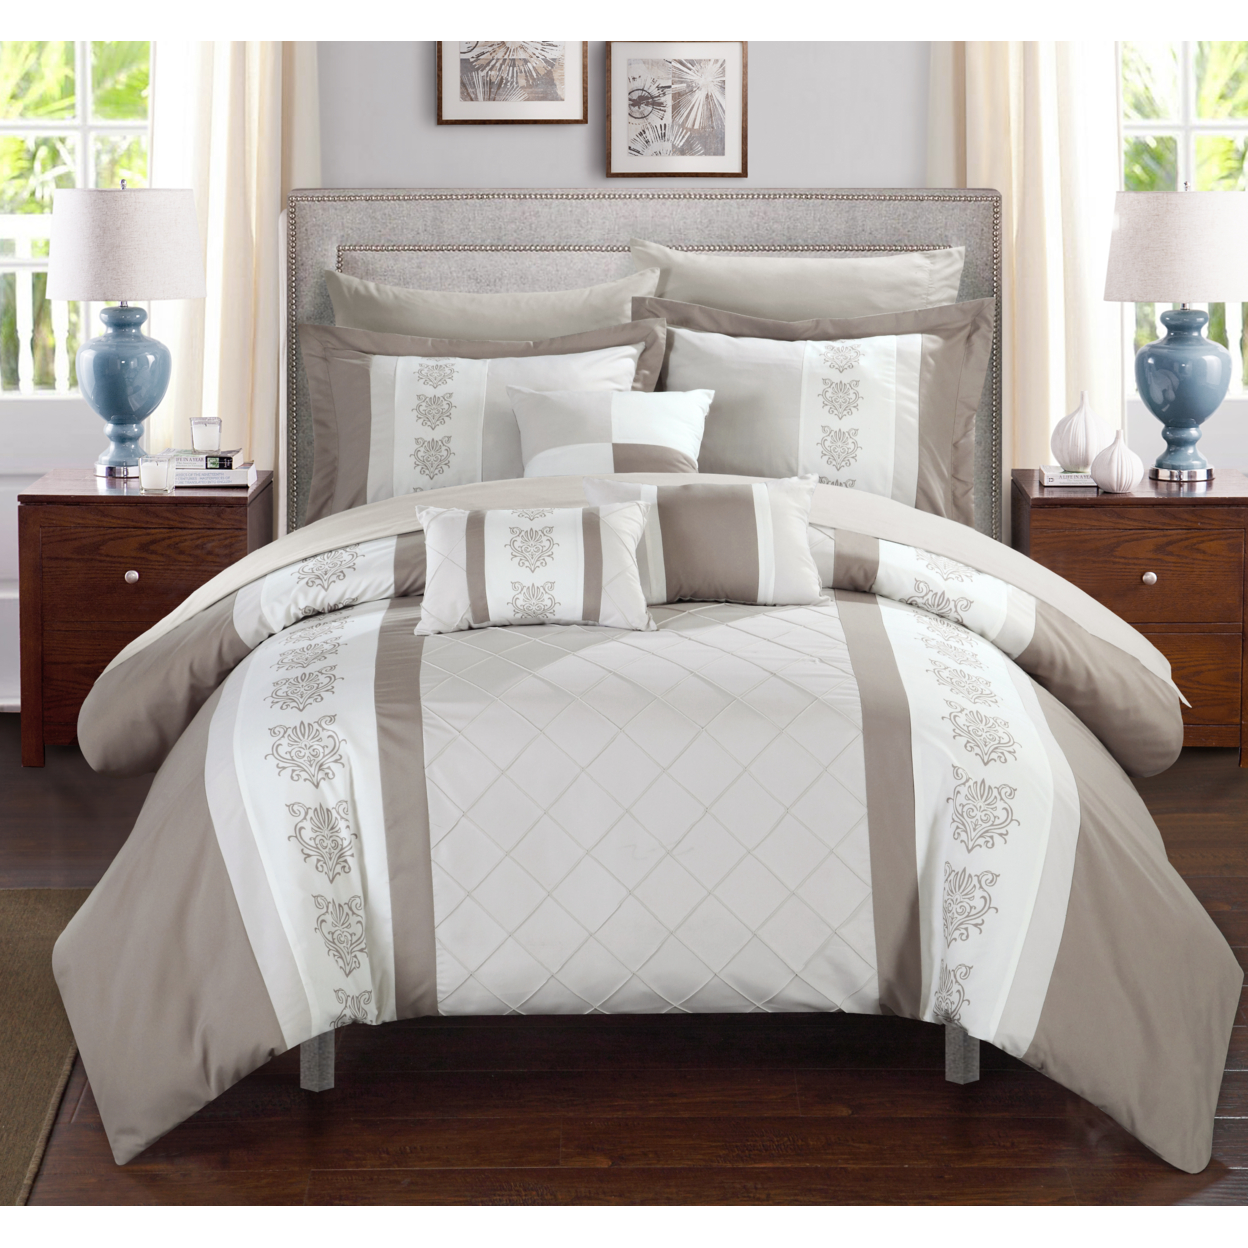 Chic Home 8/10 Piece Adam Pintuck Pieced Color Block Embroidery Bed In A Bag Comforter Set With Sheet Set - Beige, Twin